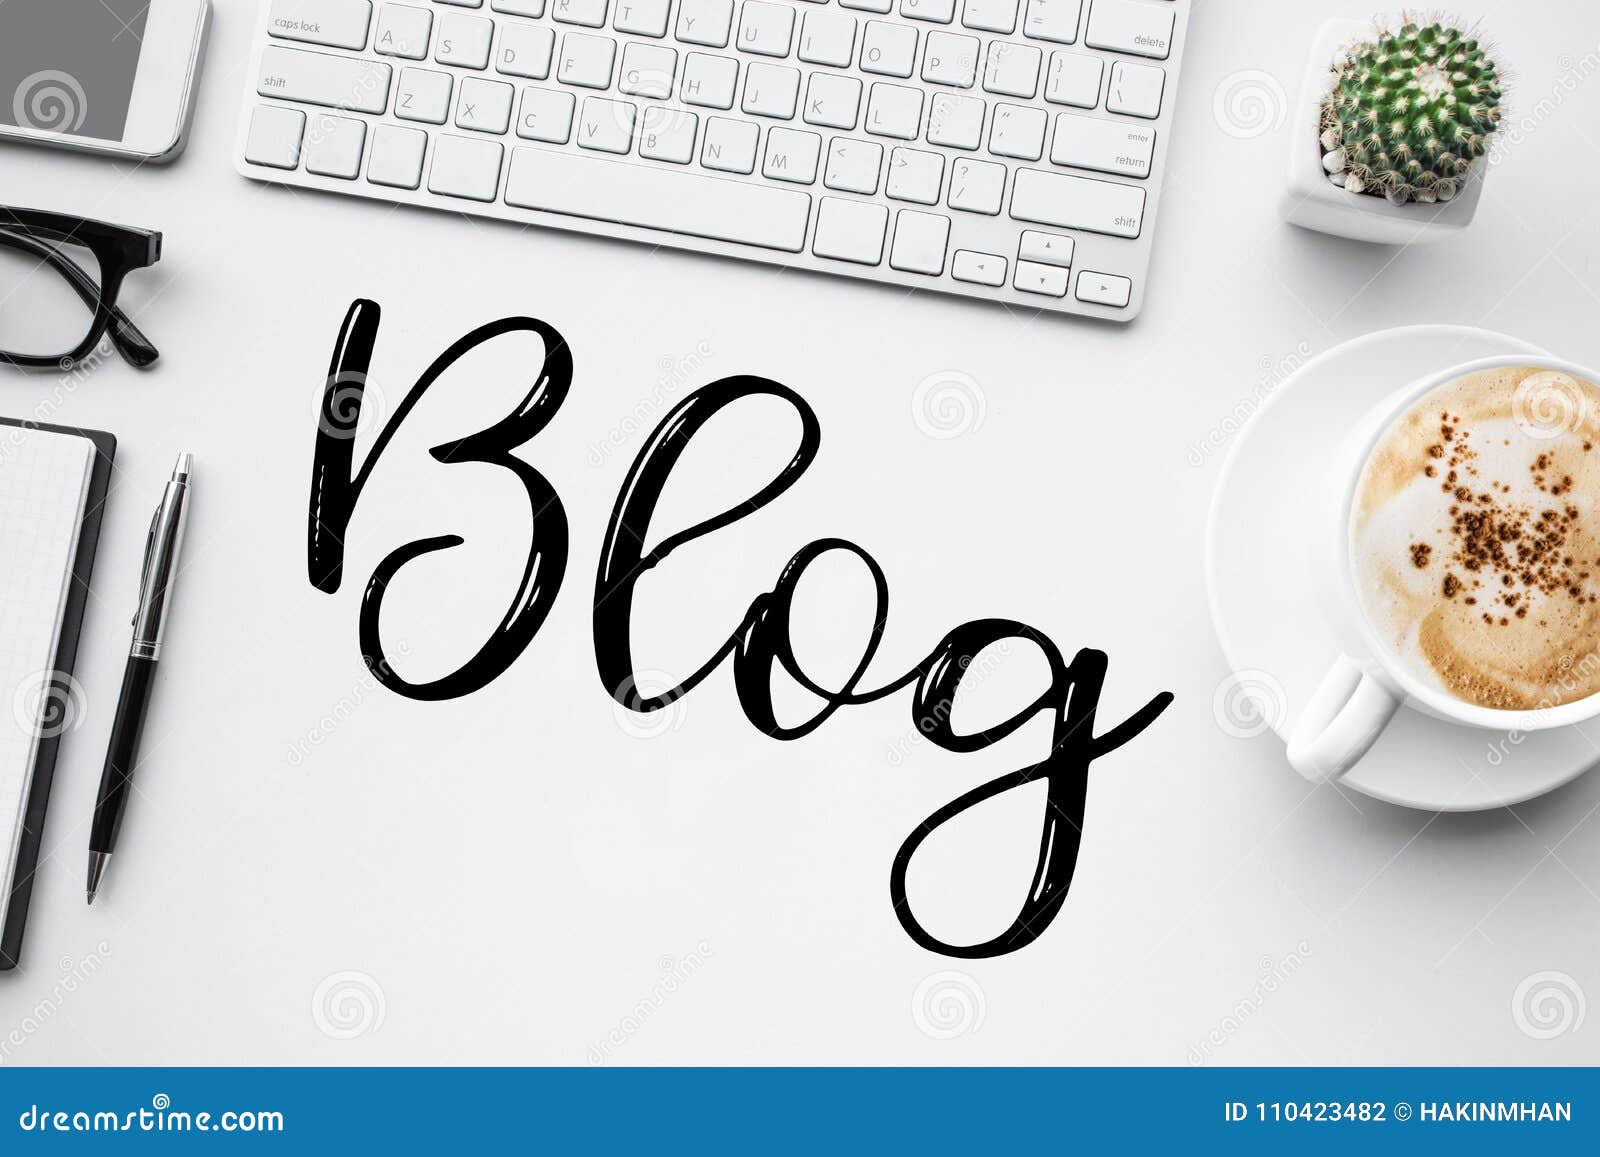 blogging,blog  ideas with worktable